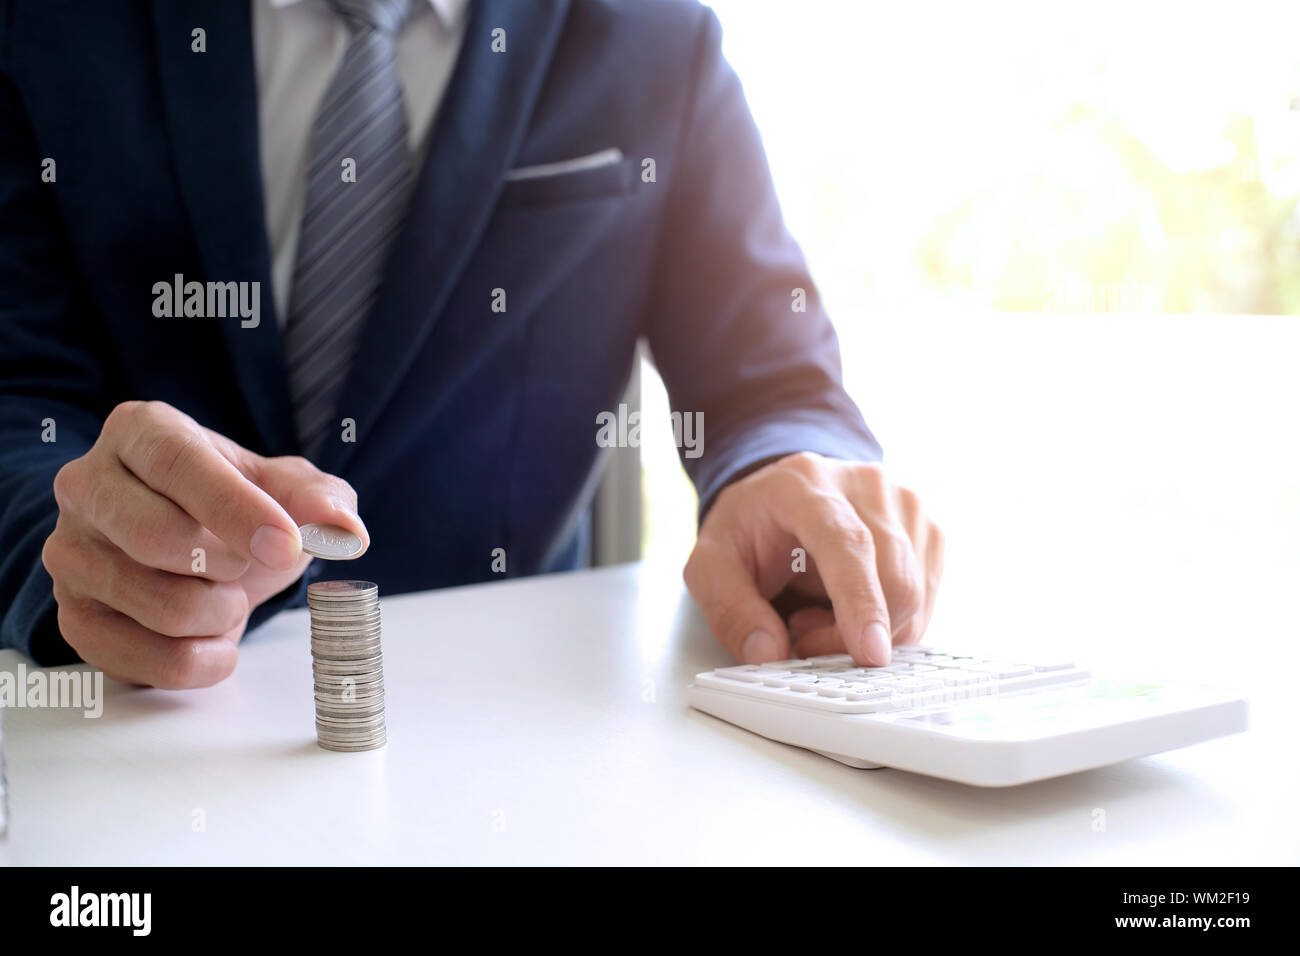 Midsection Of Businessman Calculating Coins Stock Photo